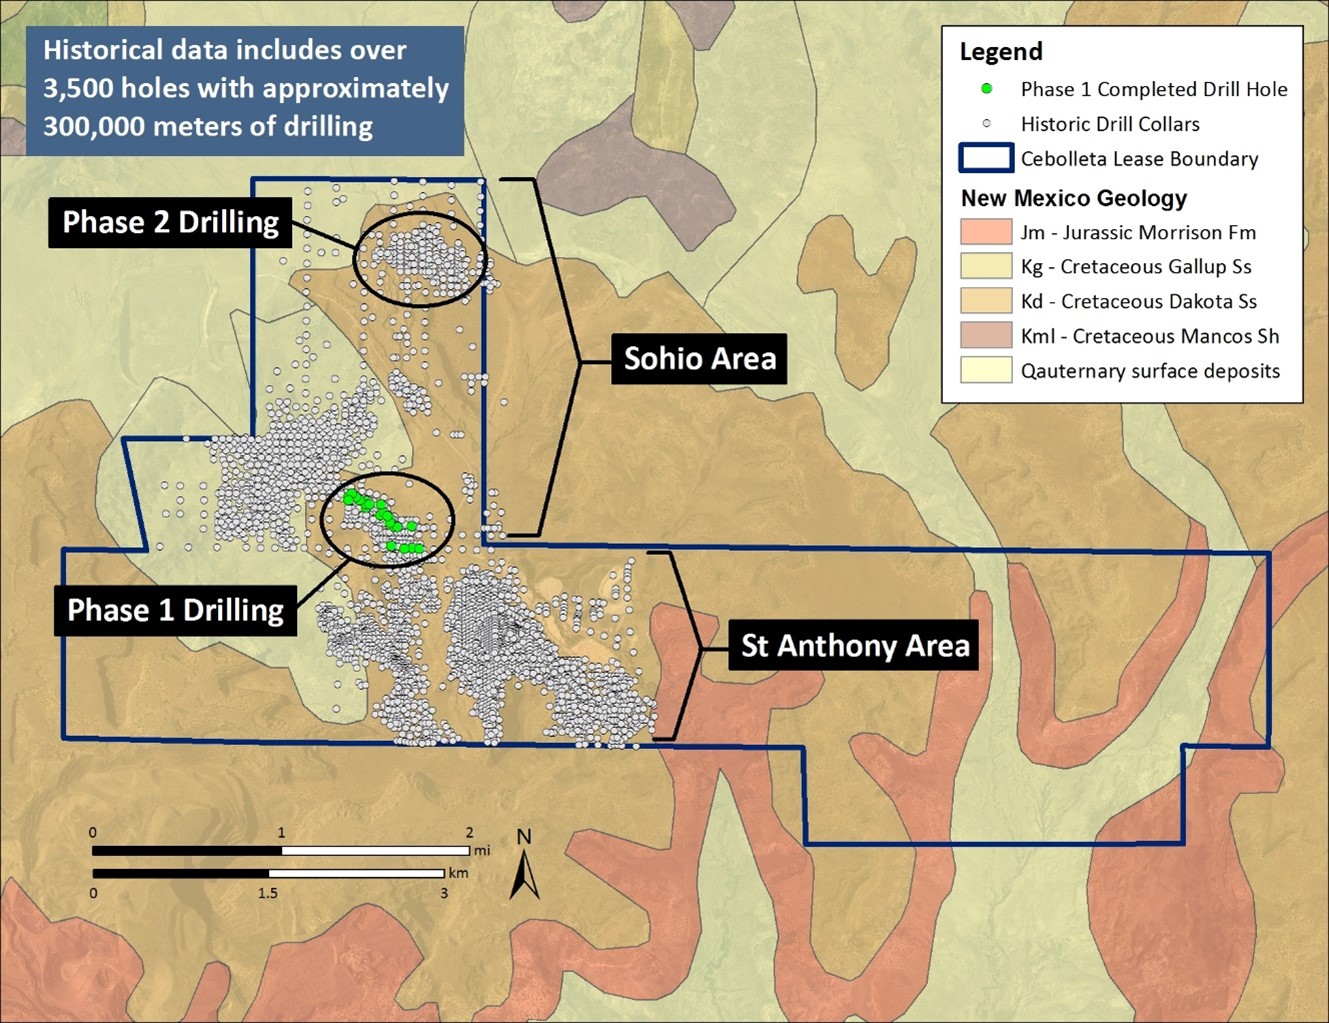 Historical Drilling and Confirmation Drilling Locations